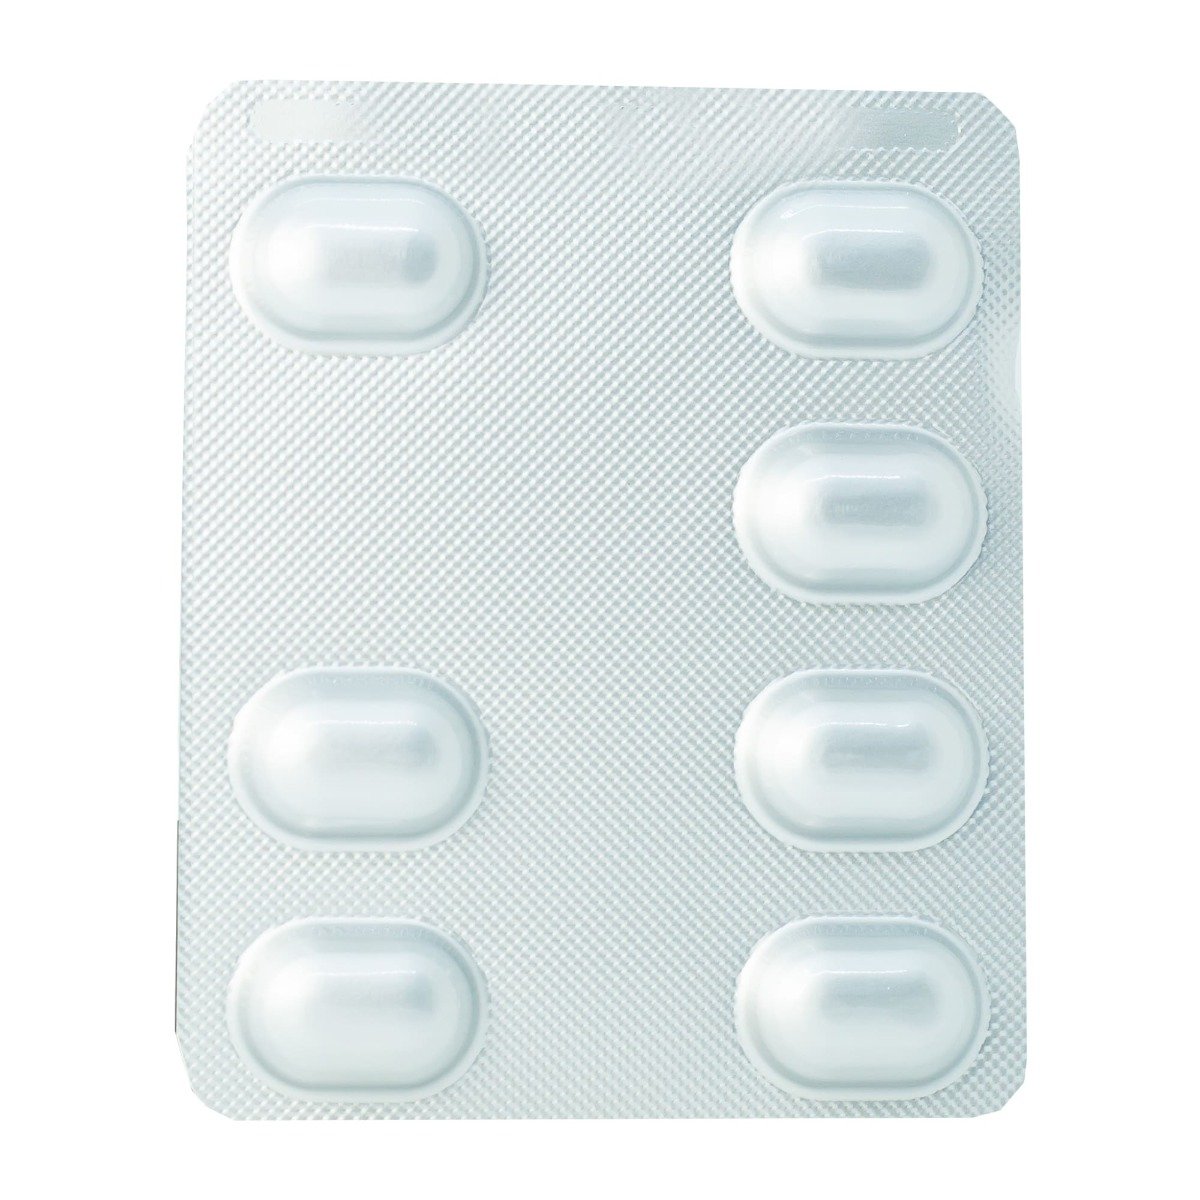 Antopral 20 mg - 14 Tablets - Bloom Pharmacy